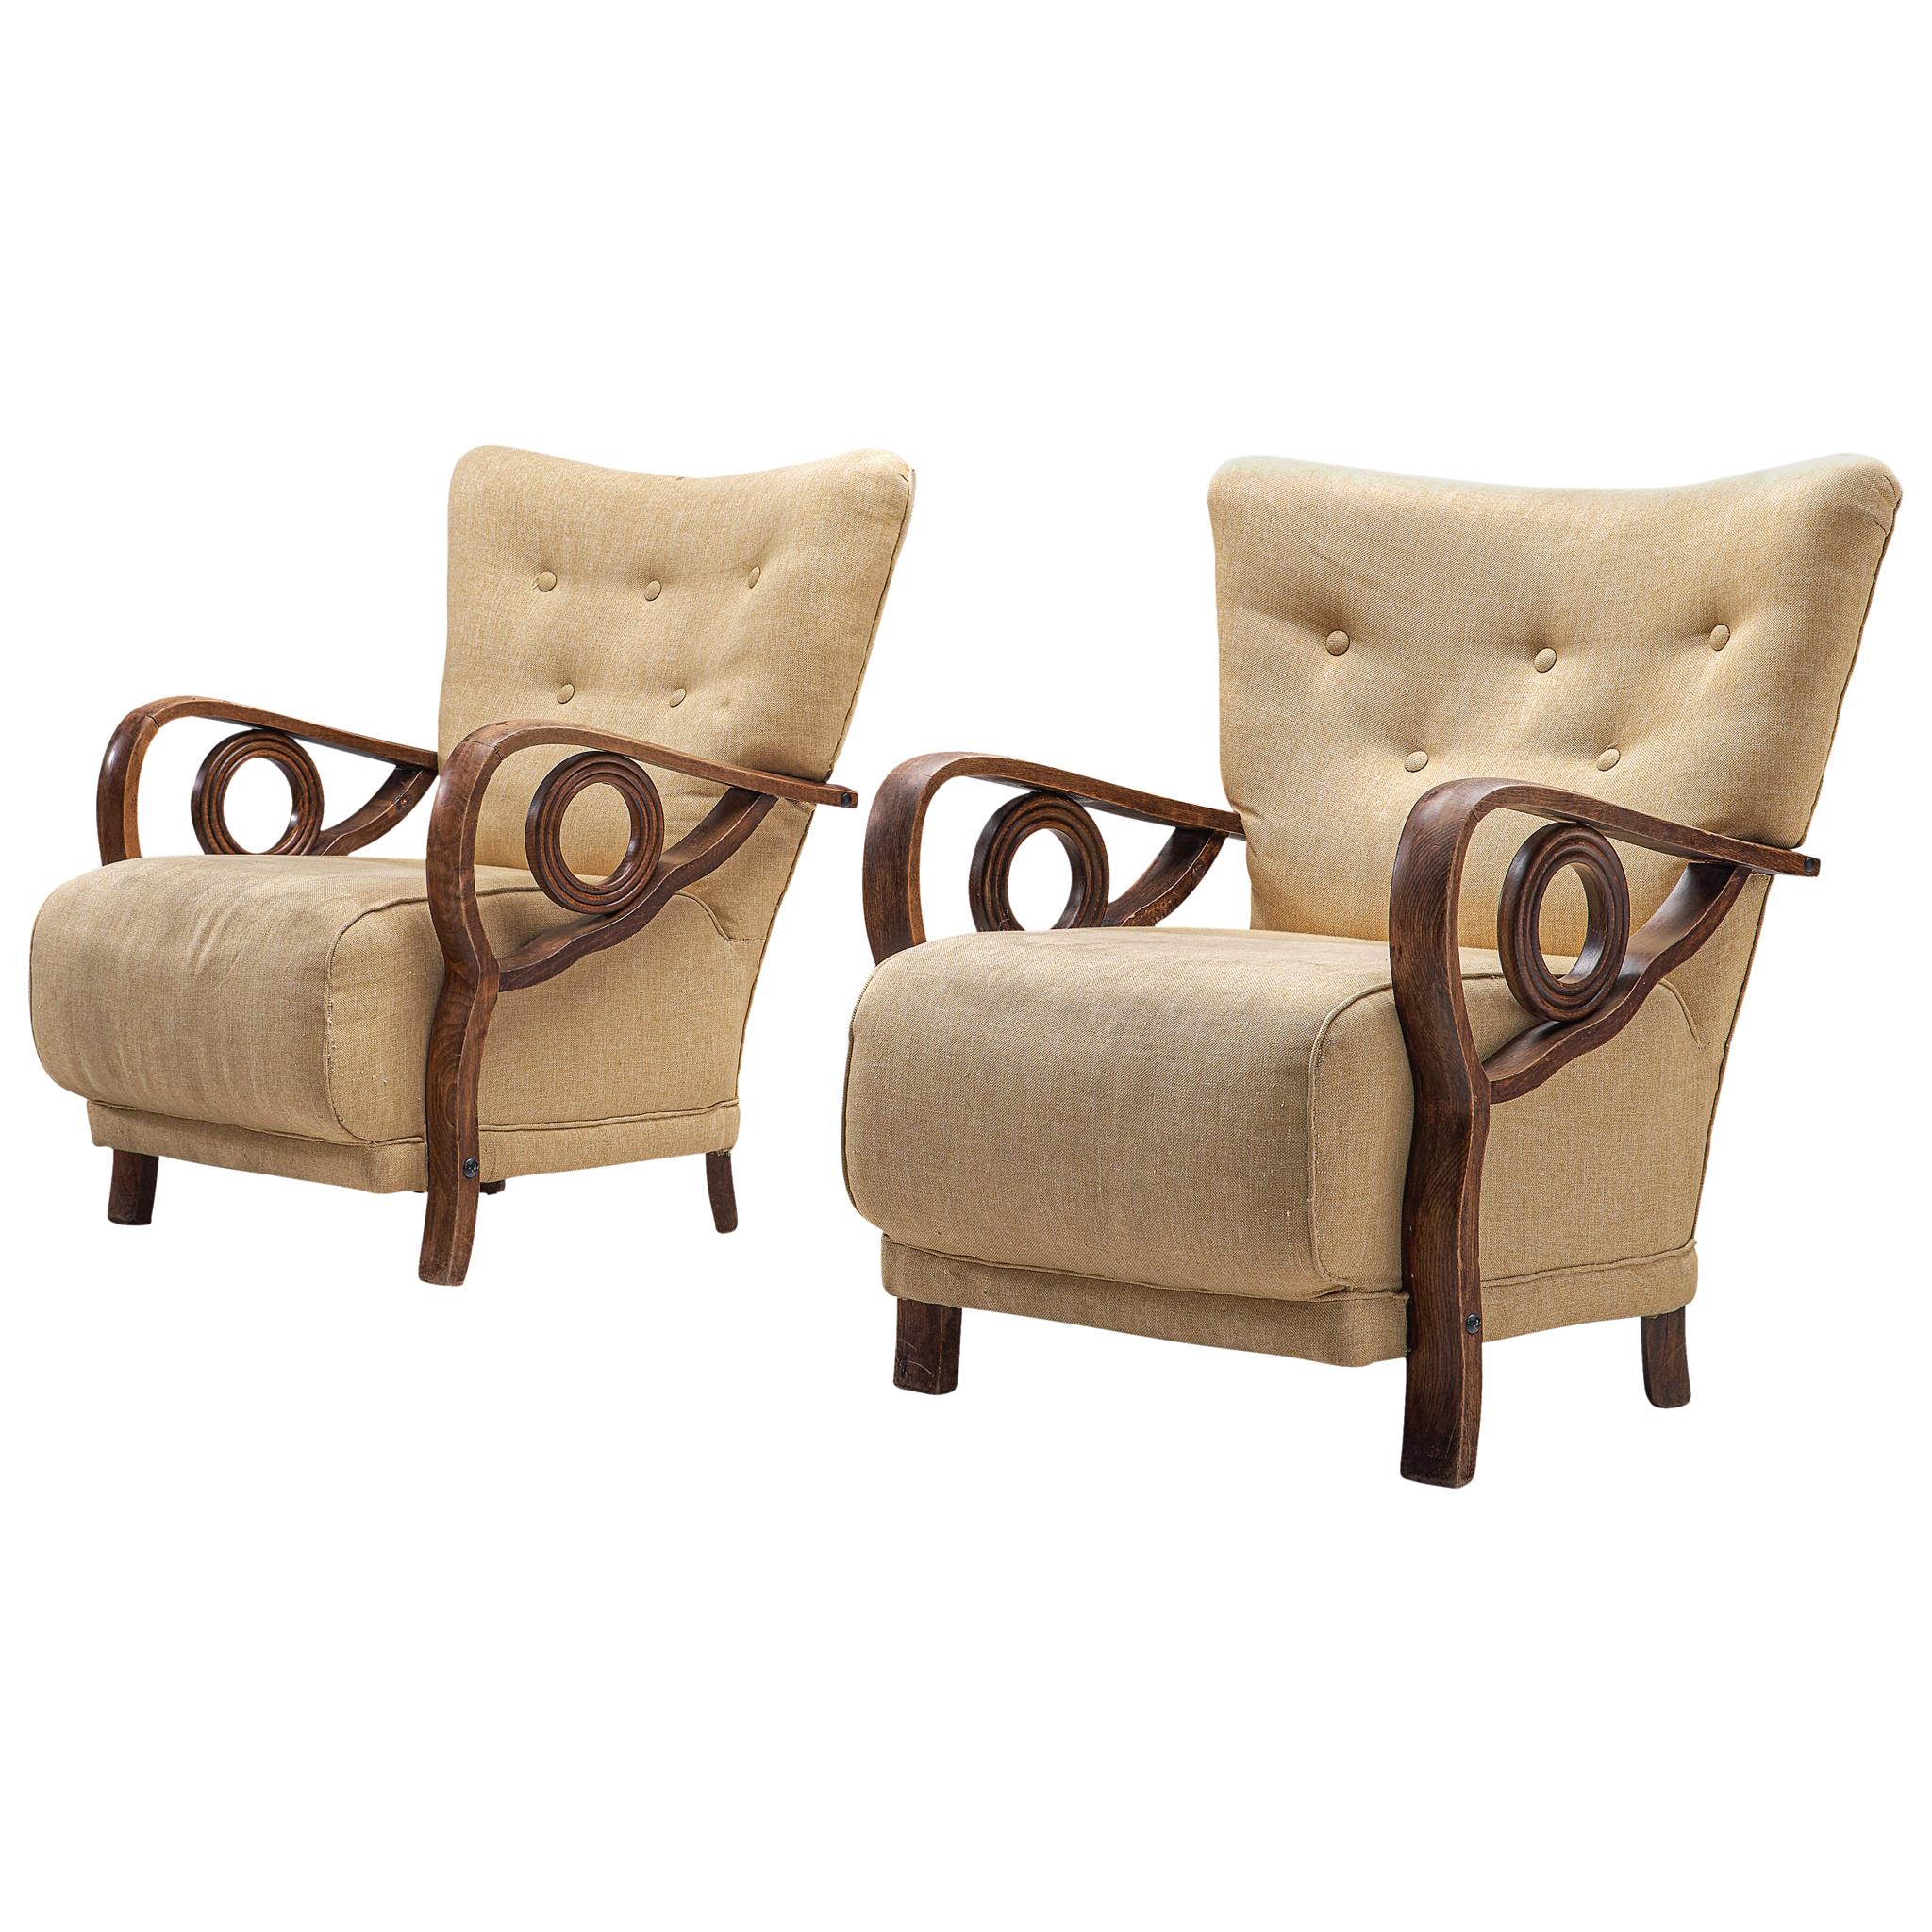 Pair of Art Deco Lounge Chairs in Oak and Fabric